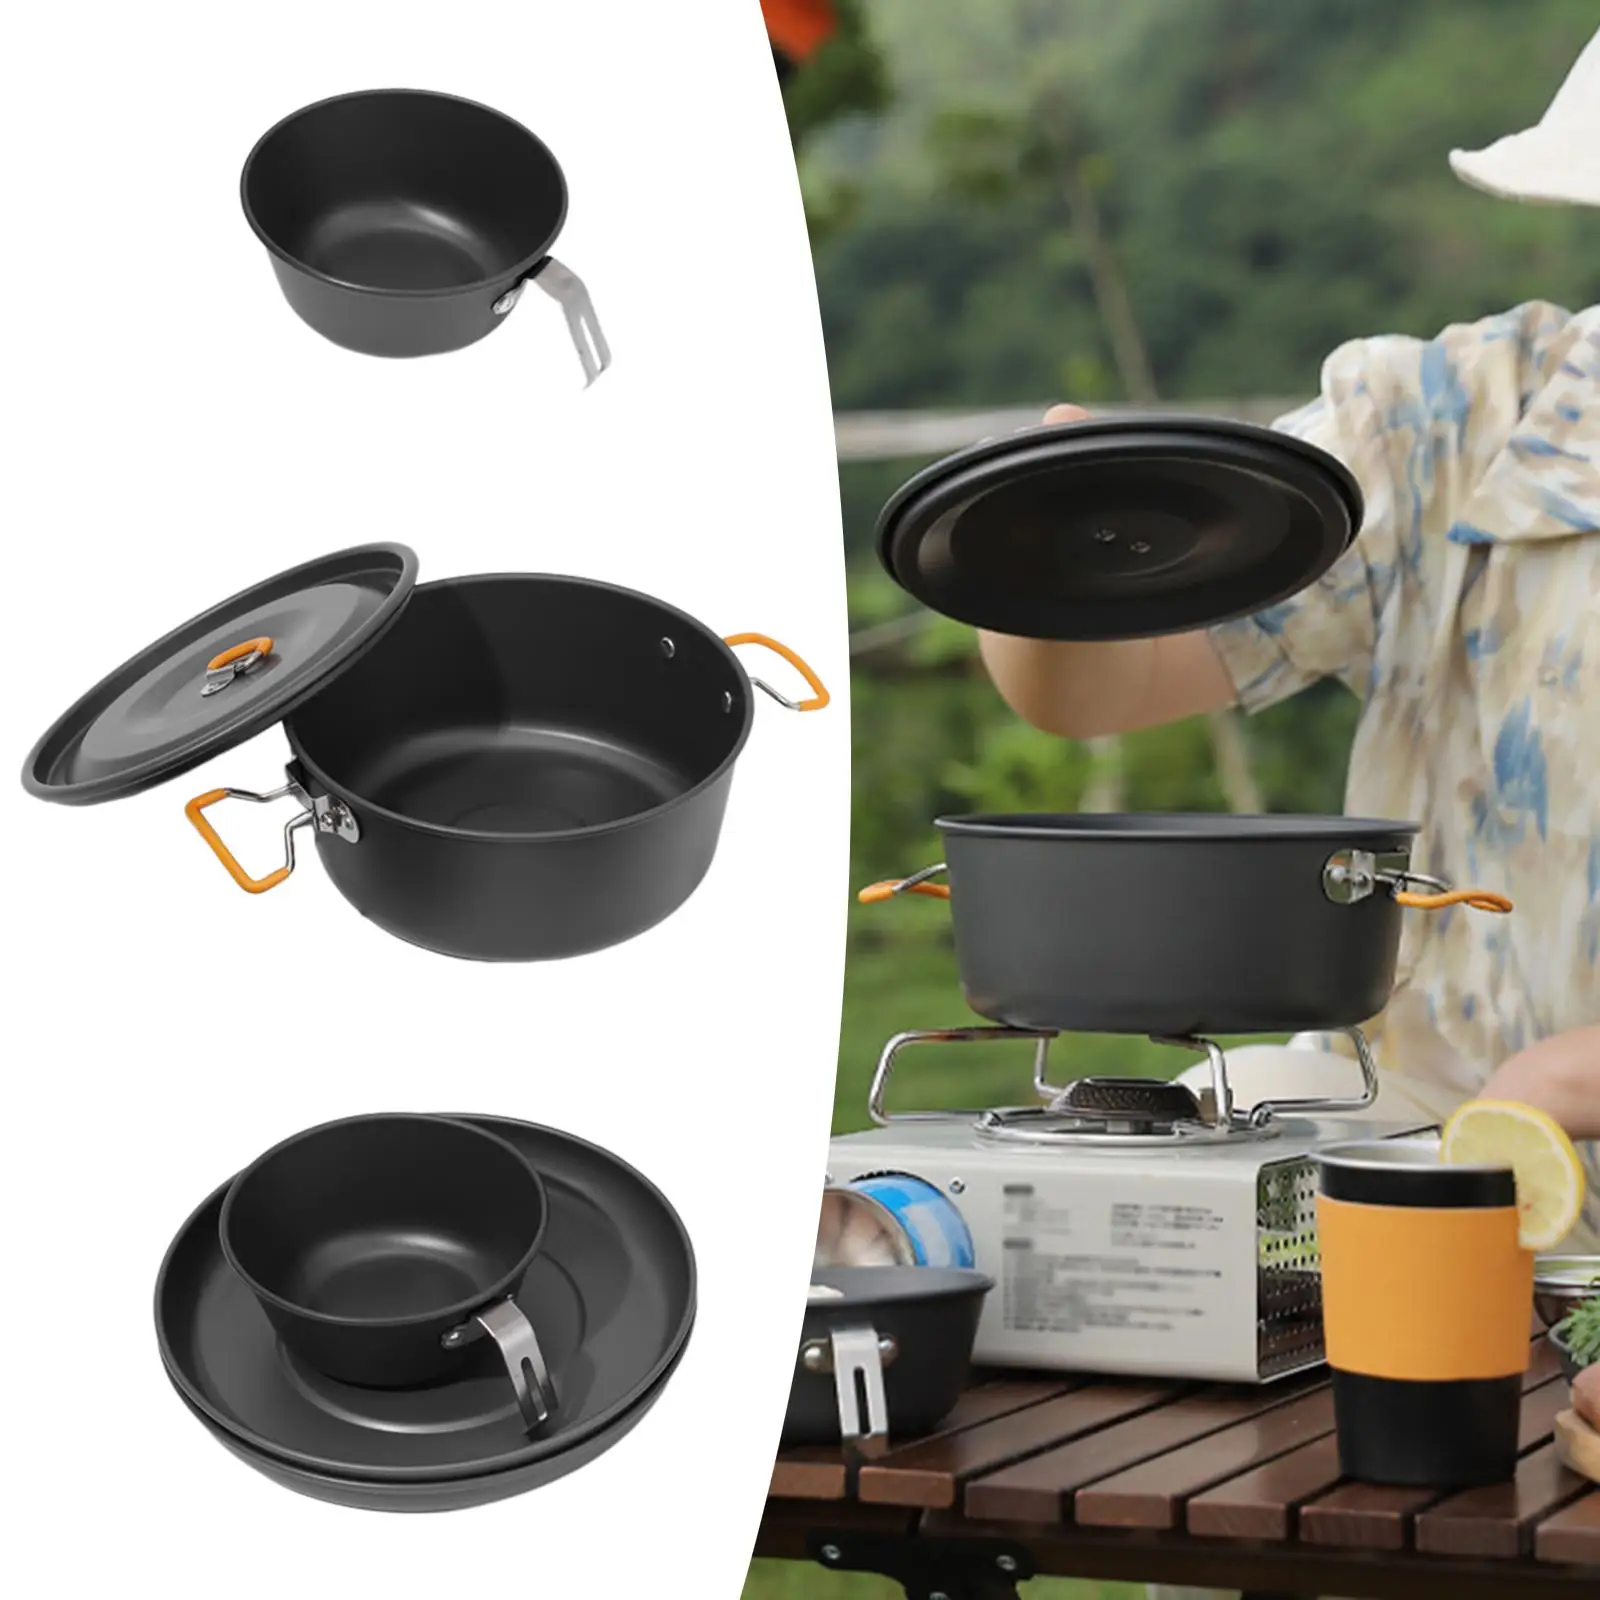 Camping Cookware Set Portable Hot Pot Travel Cutlery Utensils Stock Pot Camping Pot for Hiking Survival Fishing Dinner Travel